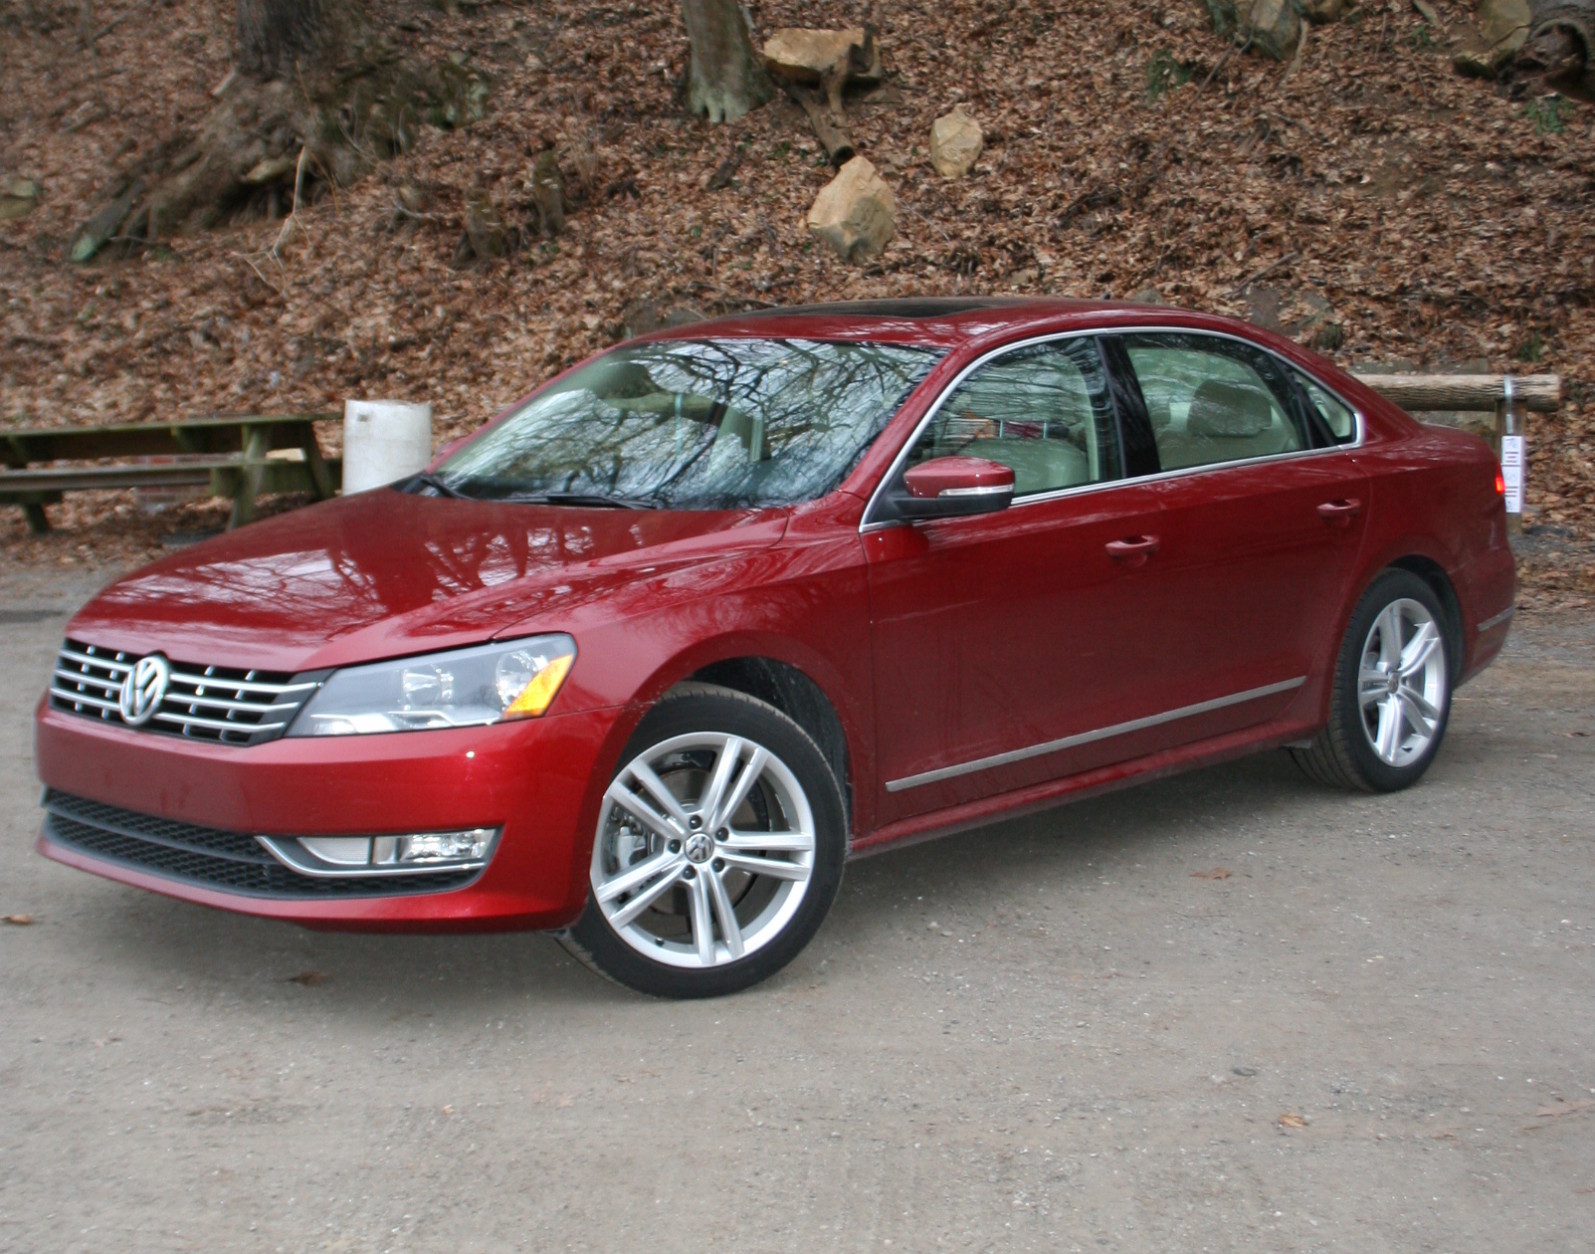 The Passat doesn’t have the standout styling as some of the competition, but it has that neat and tidy look of a more European sedan. (WTOP/Mike Parris)